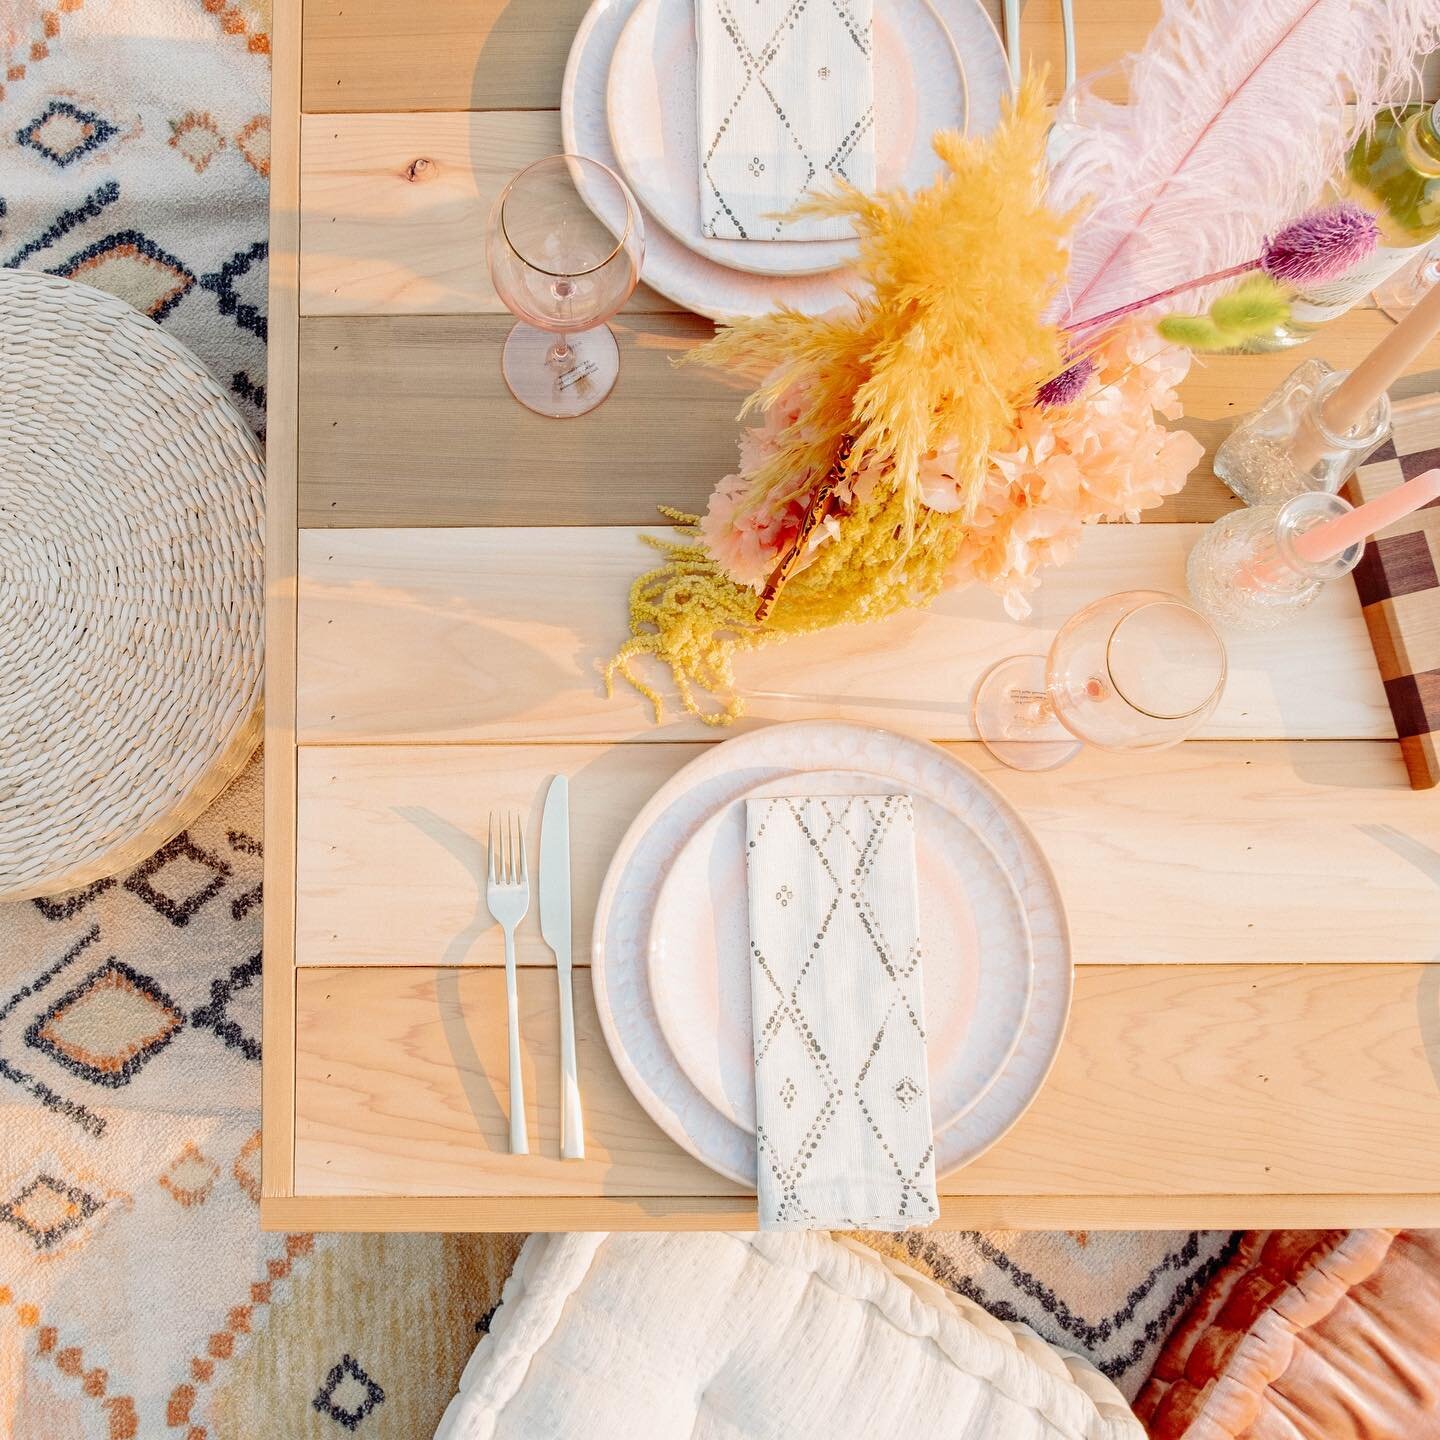 We can&rsquo;t wait to show you all of our different picnic designs this summer, customizable to any colour scheme of your choosing ♡

#vancouvereventplanner #vancouverevents #popuppicnics #eventplanner #supportlocalbusiness #supportsmallbusiness #su